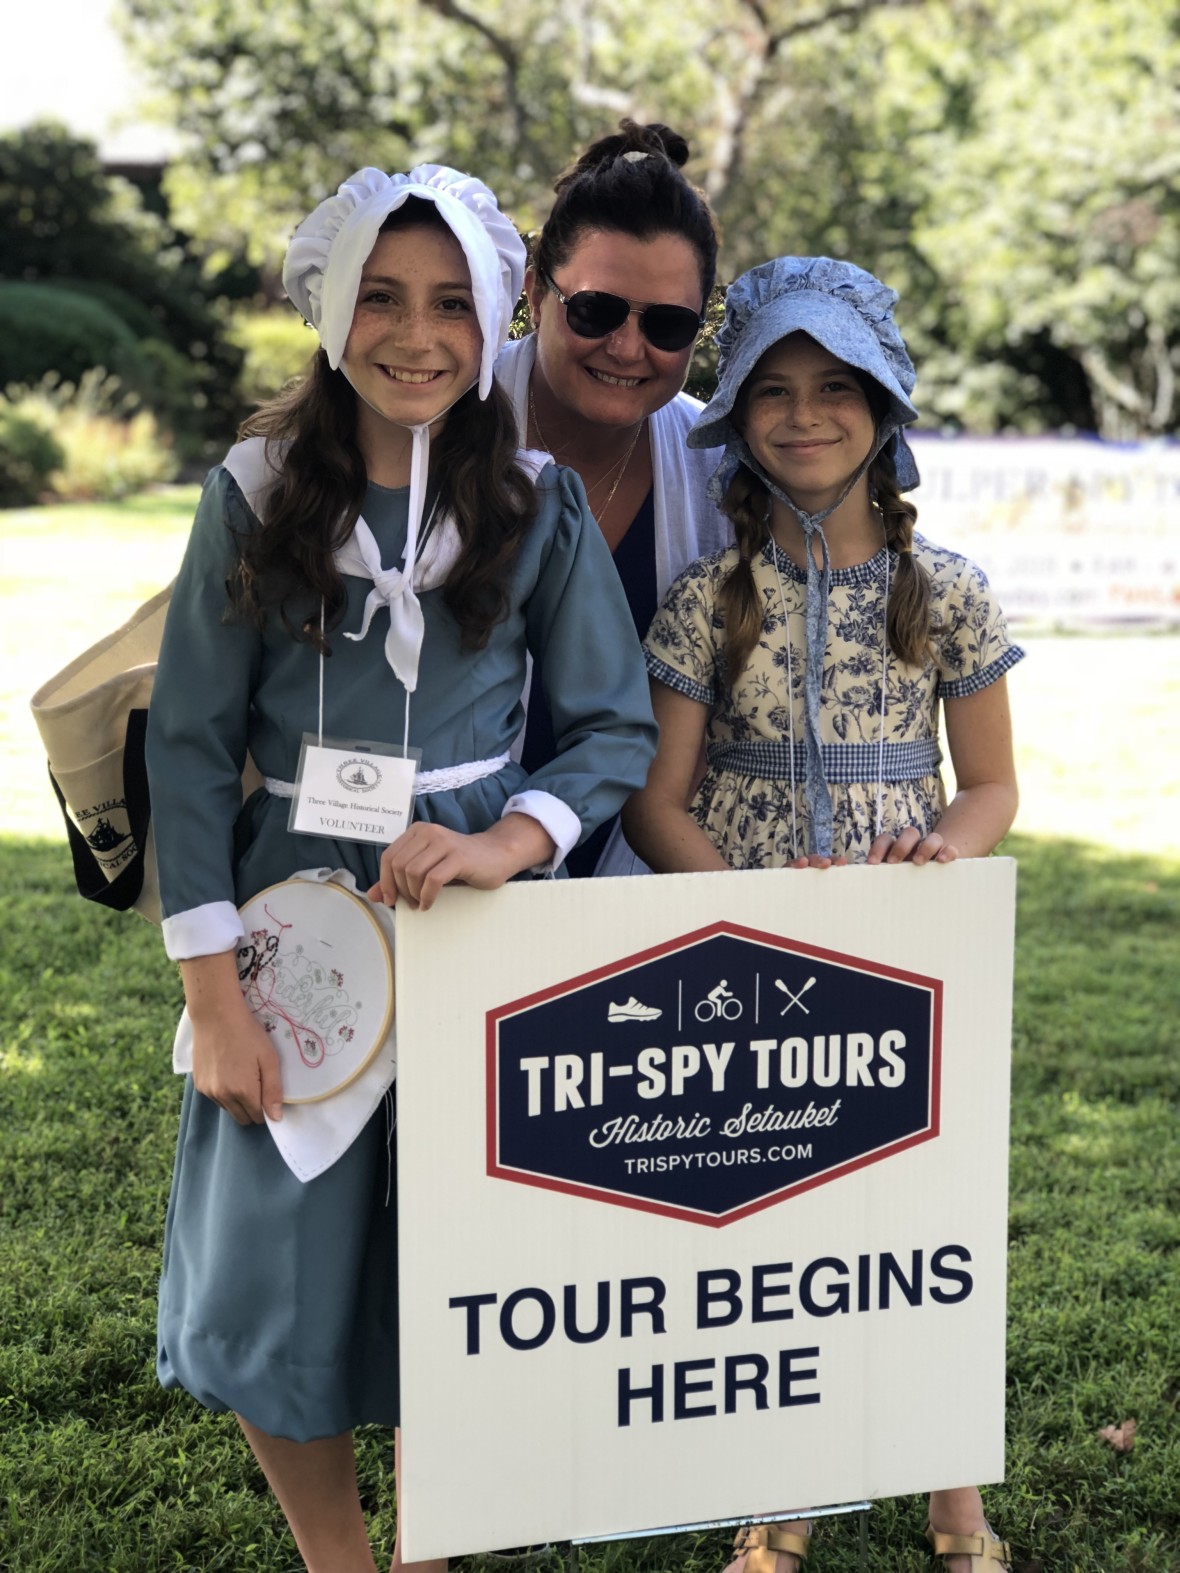 An adult and two young children in colonial garb pose in front of the Tri-Spy Tours sign